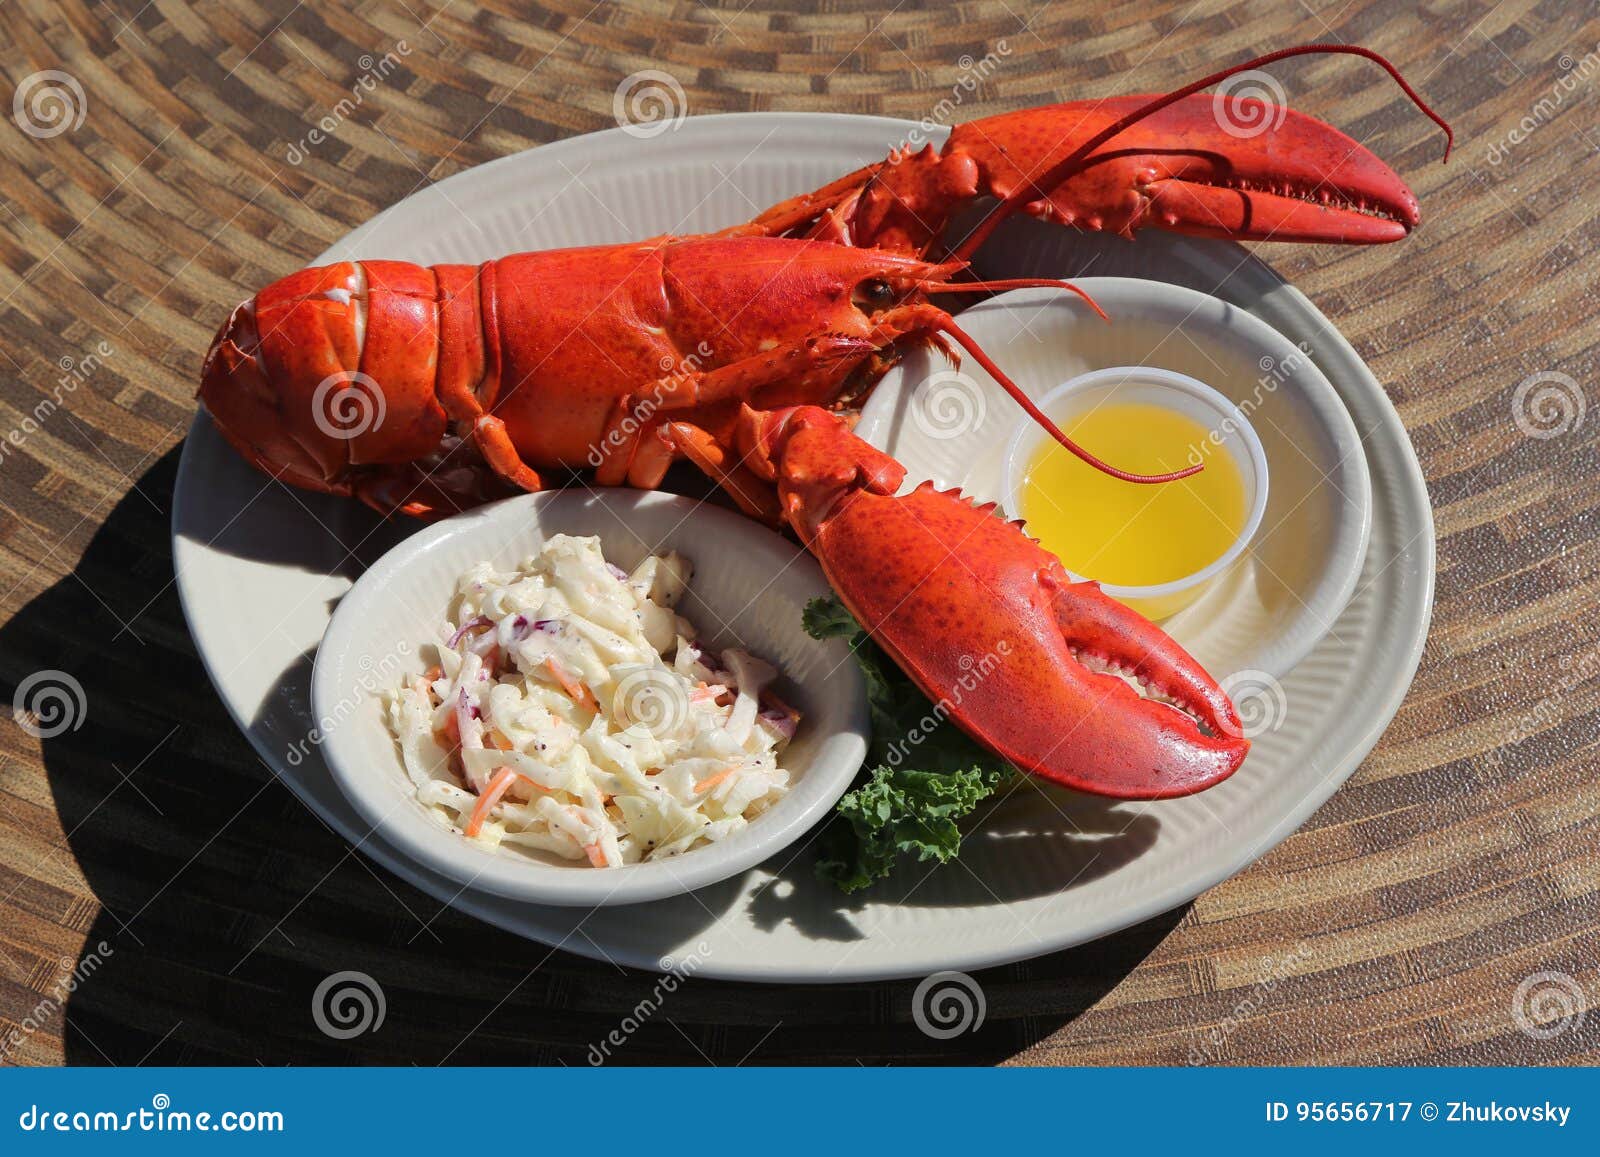 Traditional Lobster Bake in Maine Stock Image - Image of crayfish